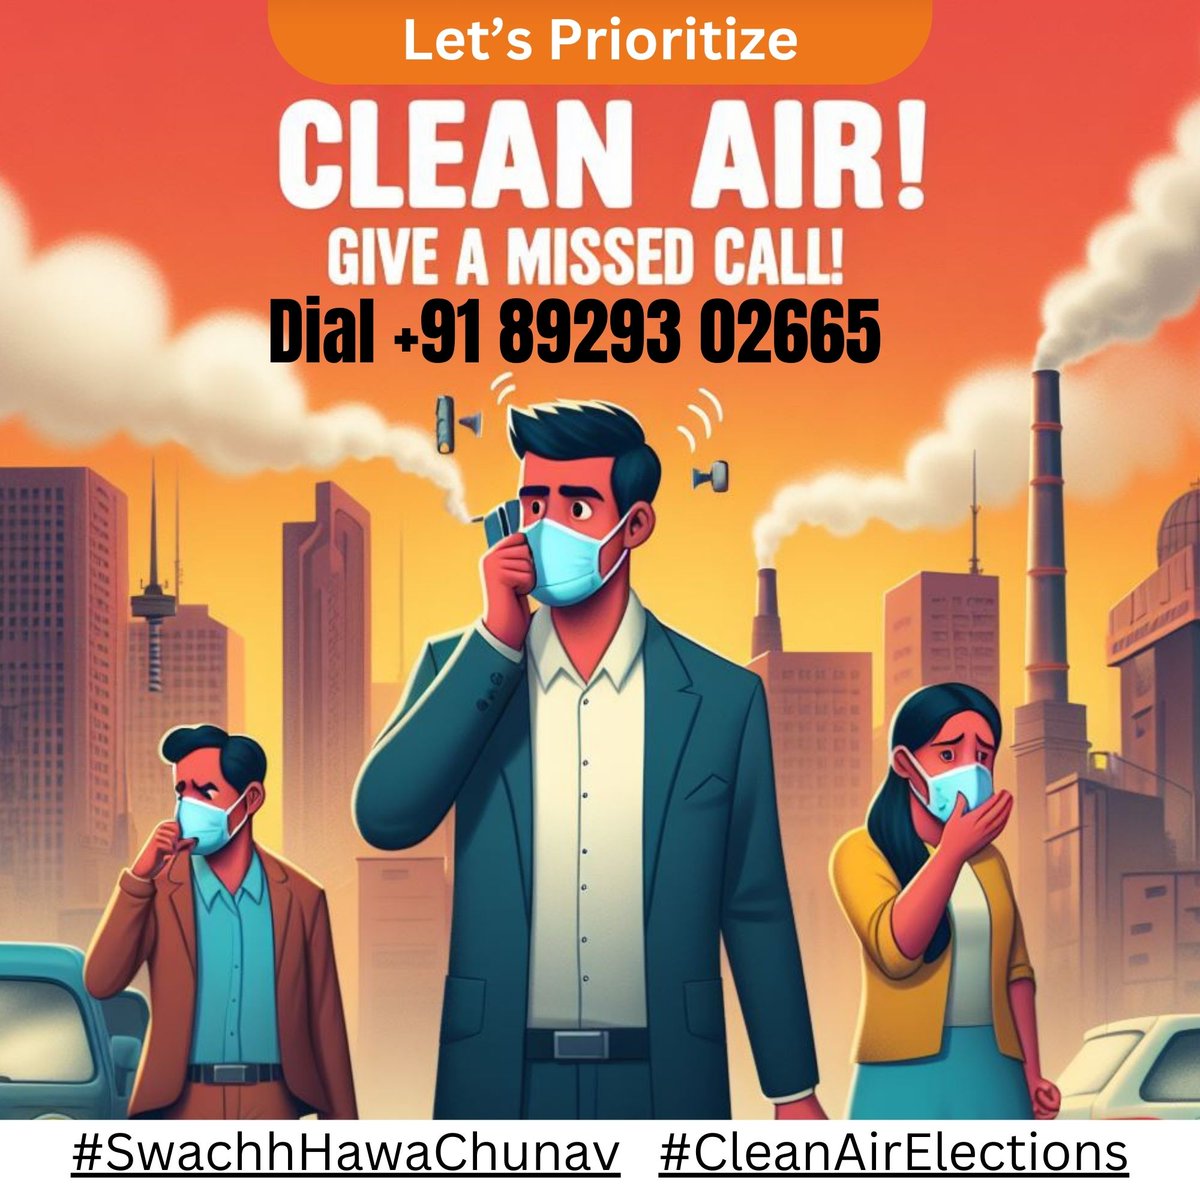 Did you know 83 of the top 100 most polluted cities are right here in India? Let your missed call speak for Clean Air! Dial +91 89293 02665 to urge leaders for #SwachhHawaChunav #CleanAirElections
Visit: tinyurl.com/yc2fhmb2
Mothers for Clean Air-Election 2024 @Warriormomsin